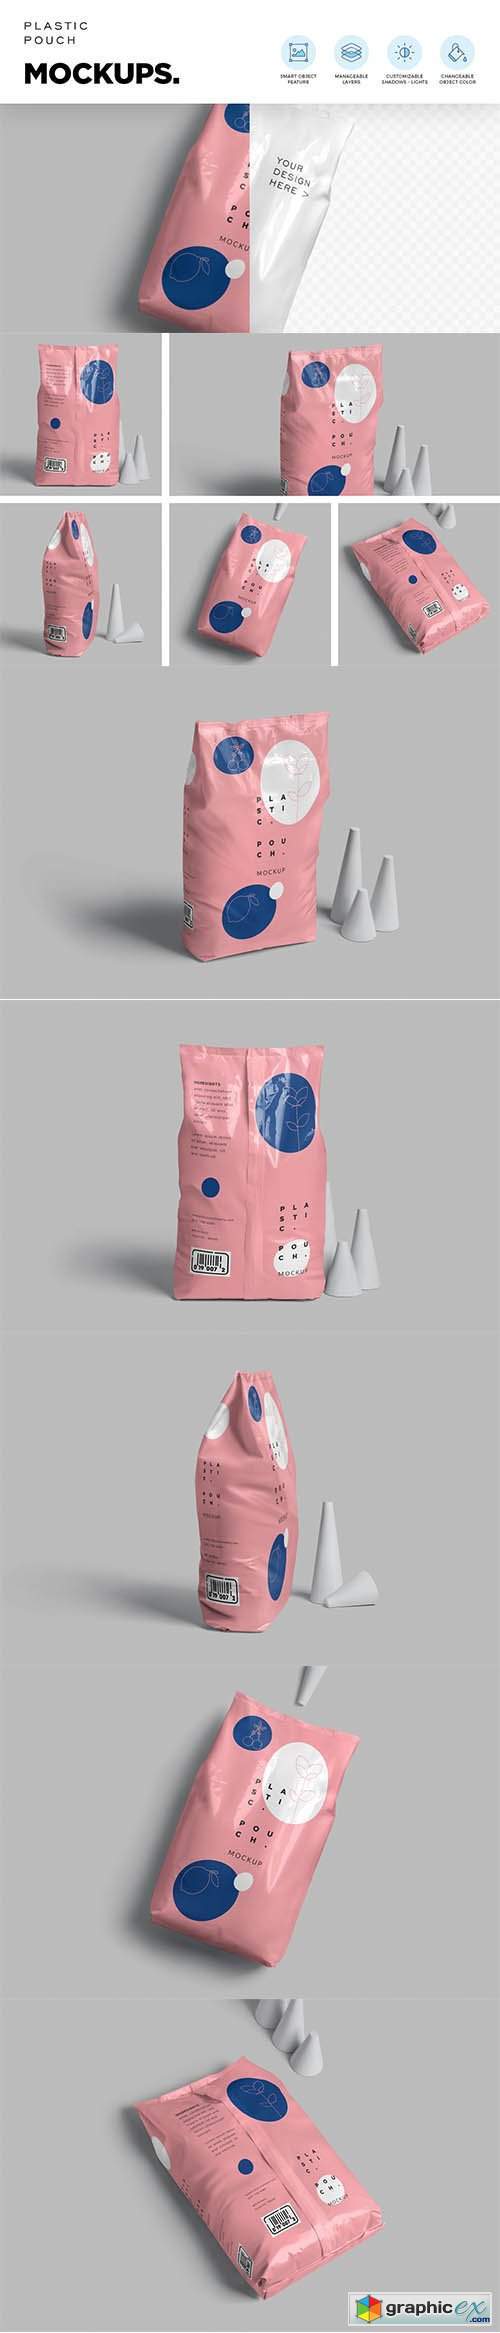 Plastic Packaging Pouch Mockups